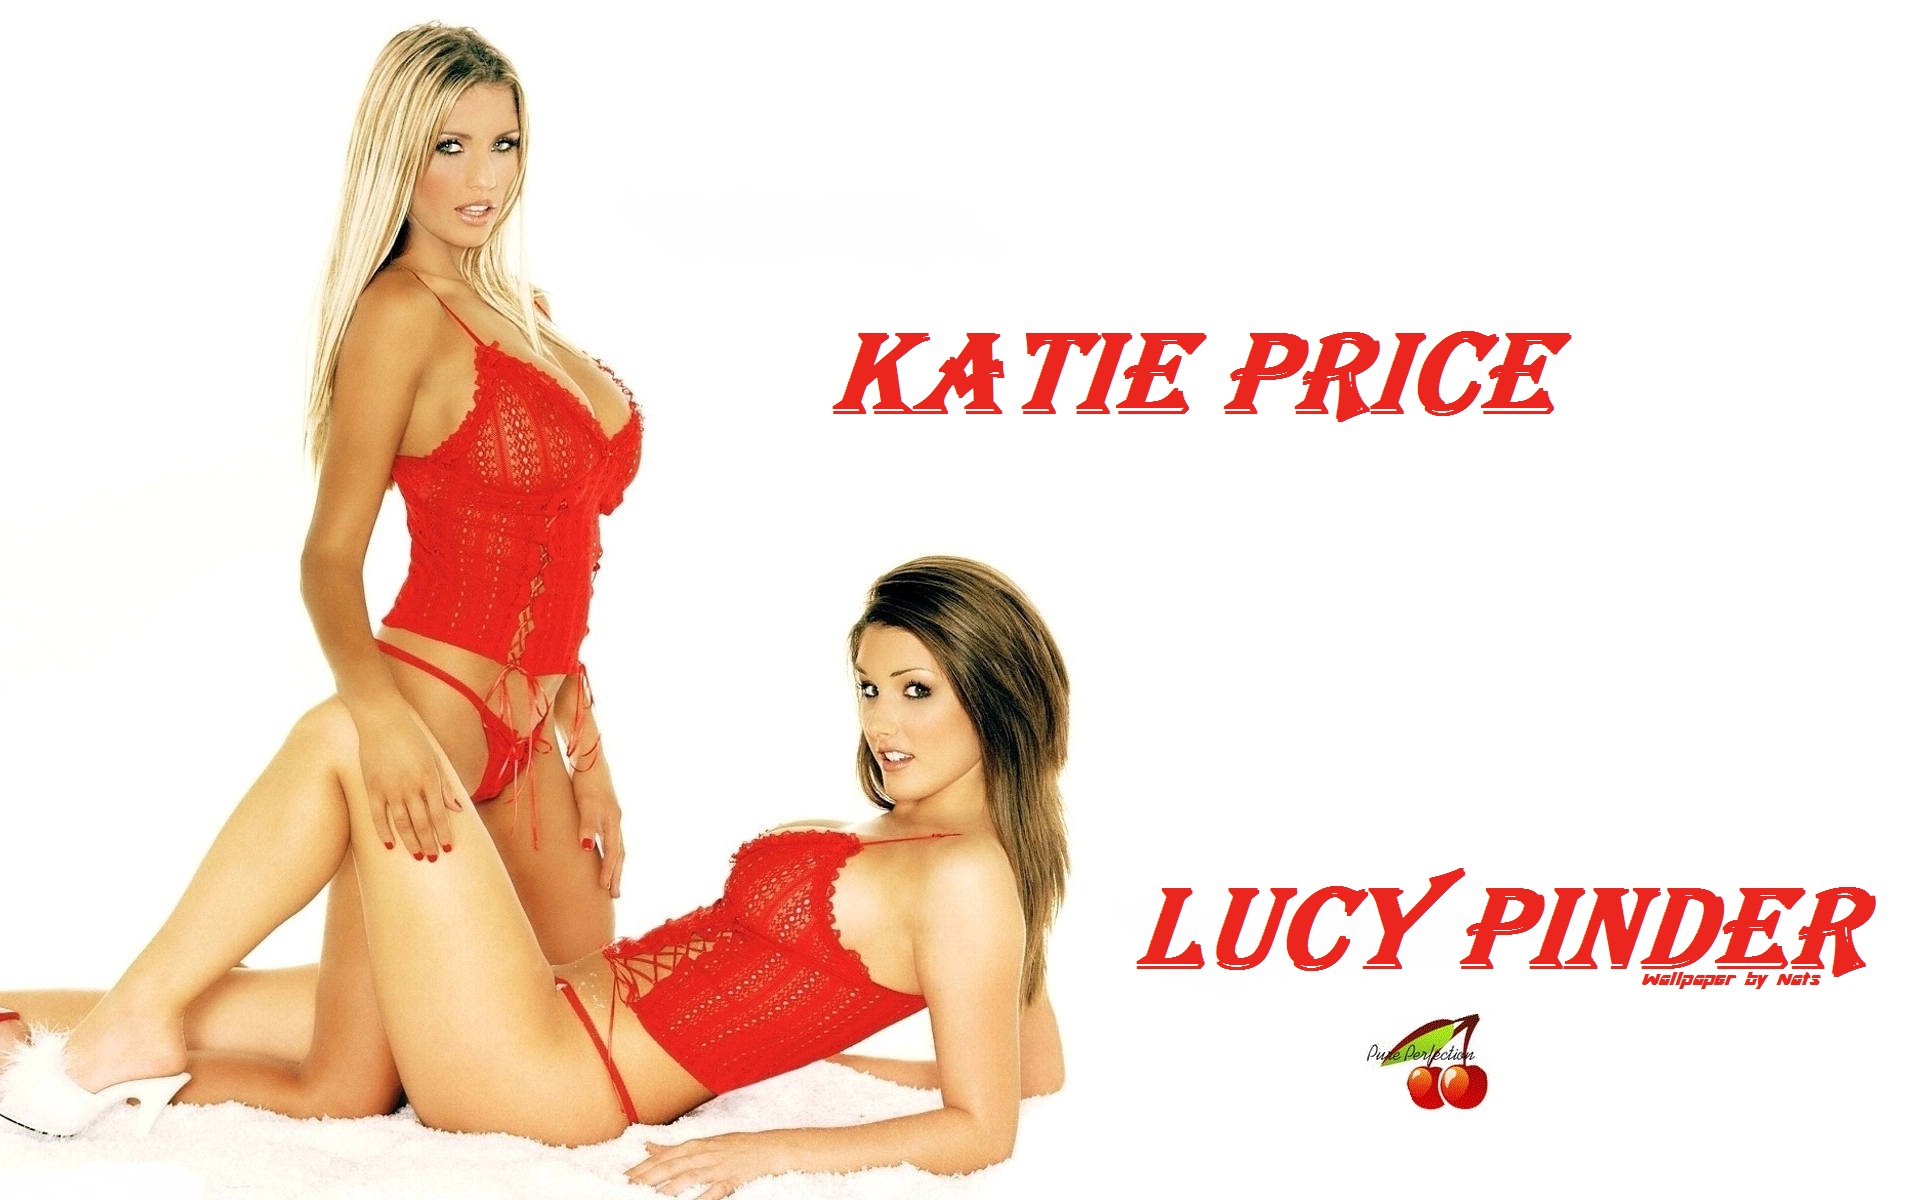 Download High quality Lucy Pinder & Katie Price Lucy Pinder wallpaper / 1920x1200